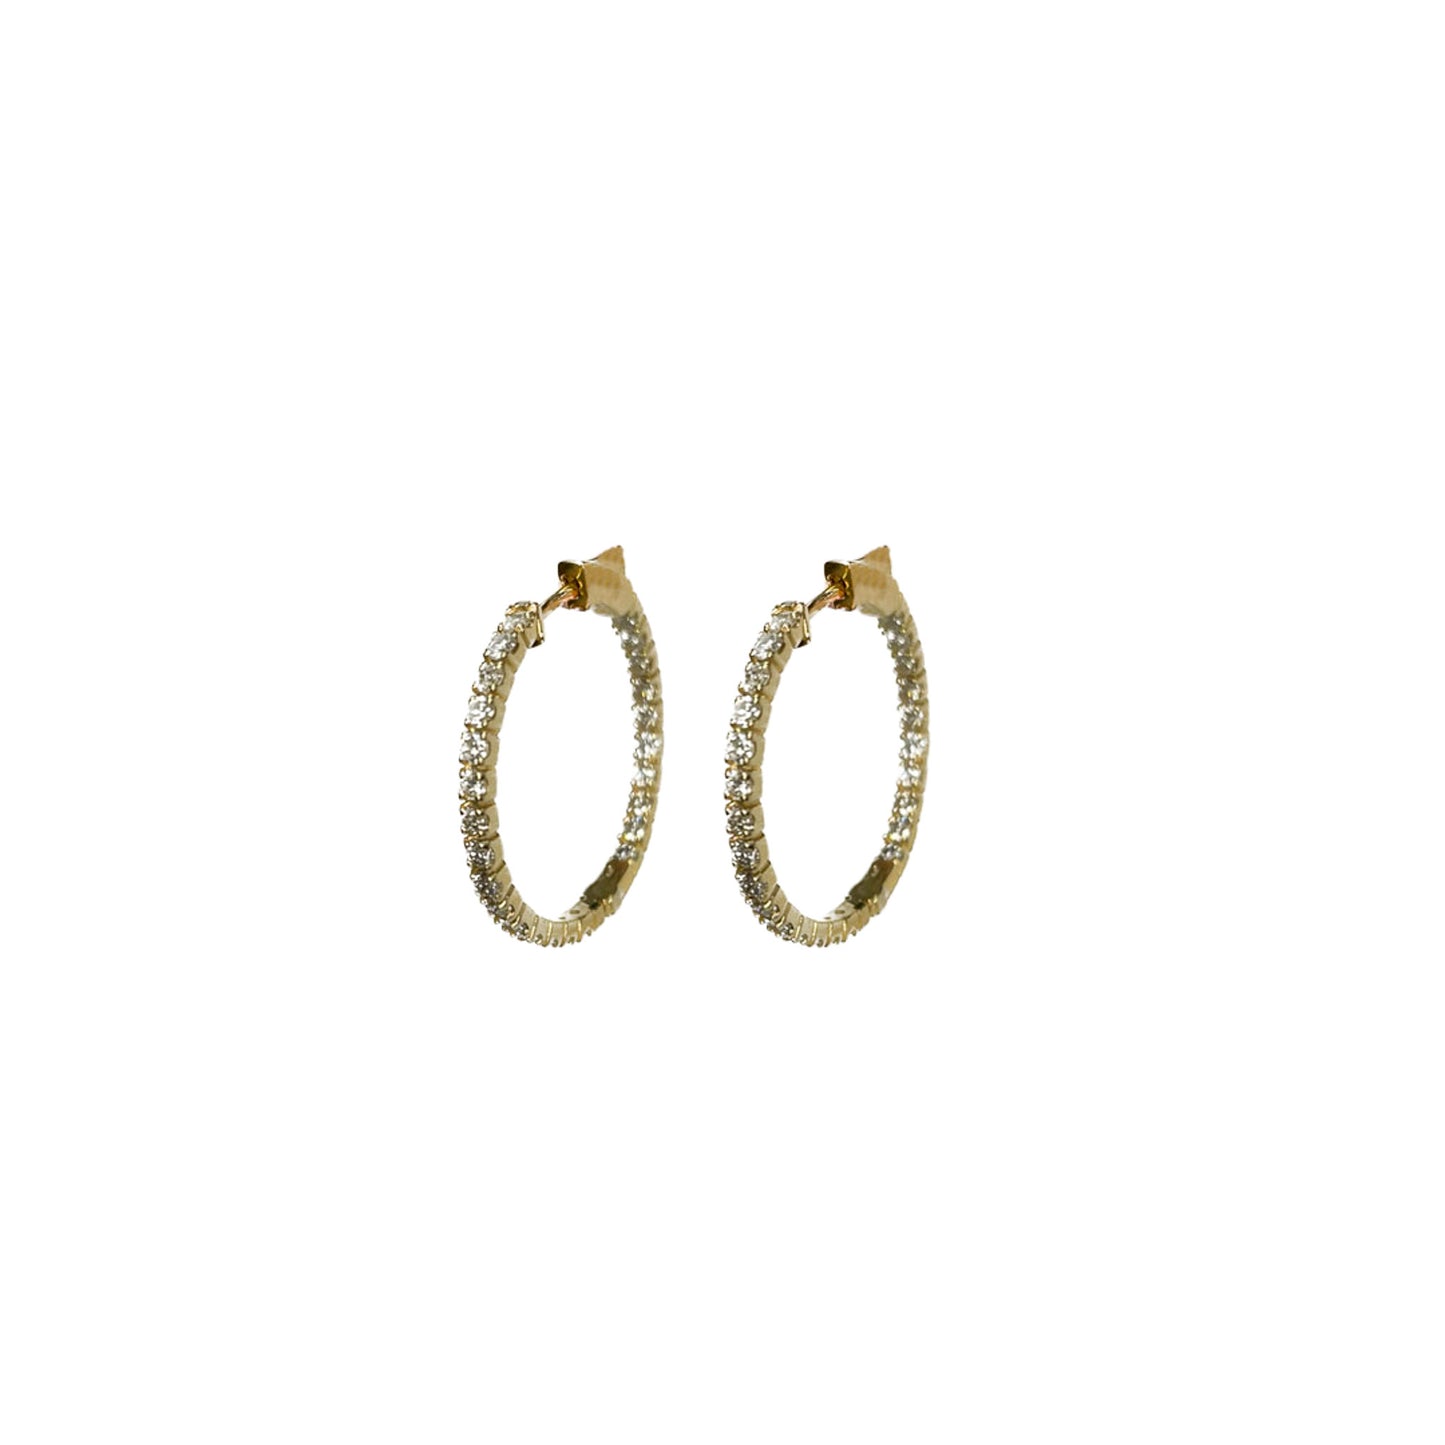 Inside-Out Diamond Hoops - 1.75 CT